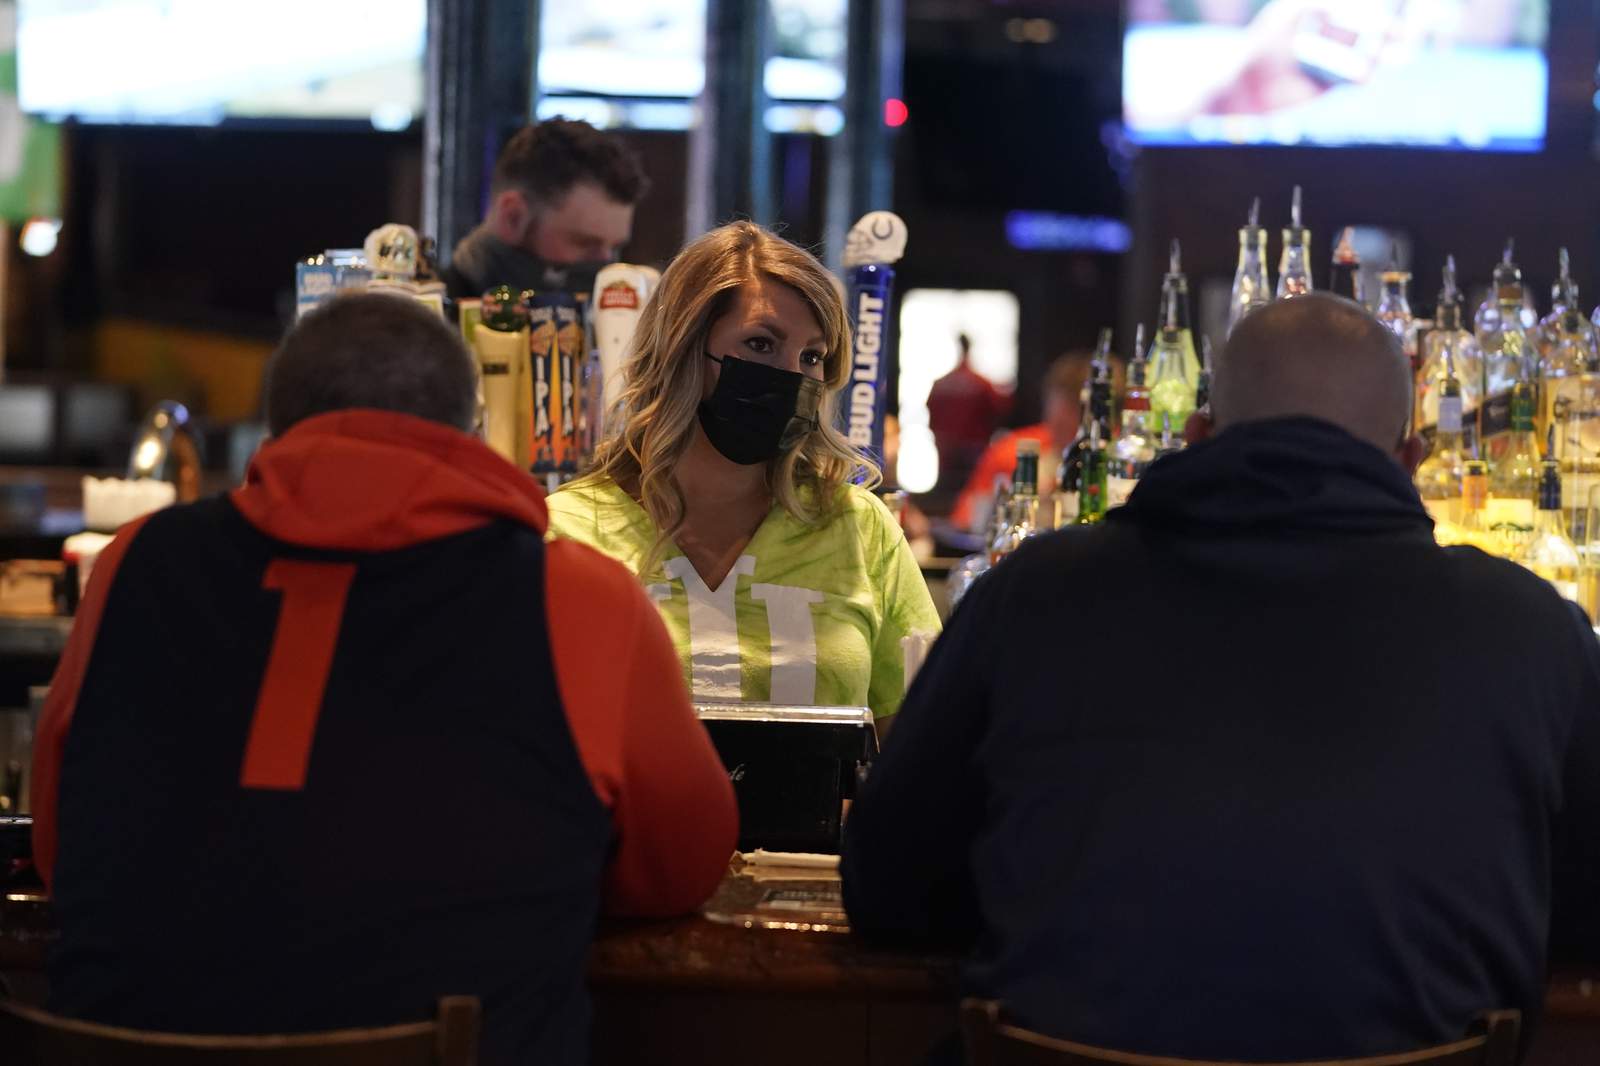 Crowded bars: March Madness or just plain madness?